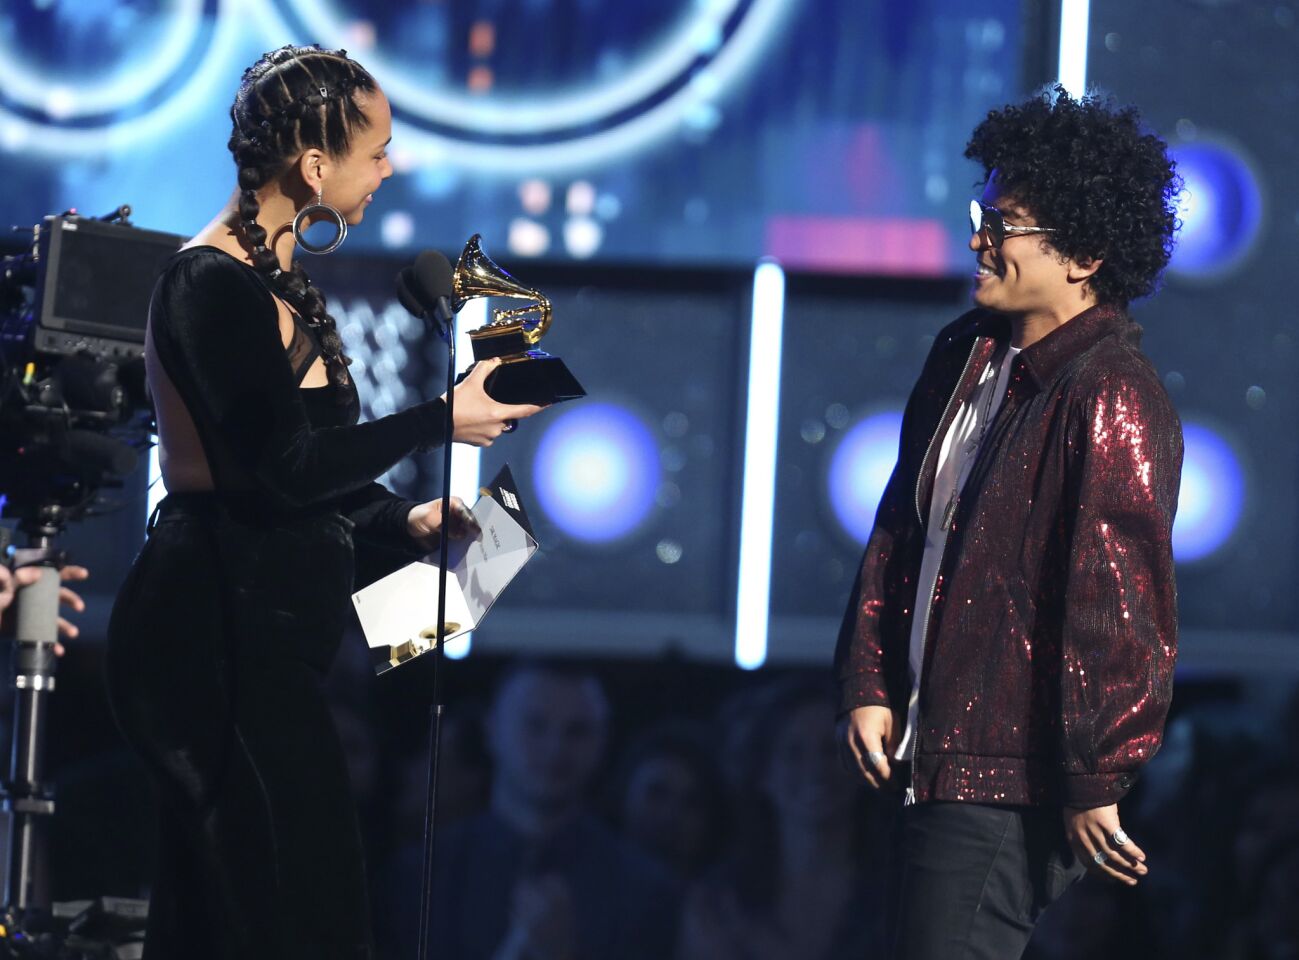 Alicia Keys presents the award for record of the year to Bruno Mars for "24K Magic."